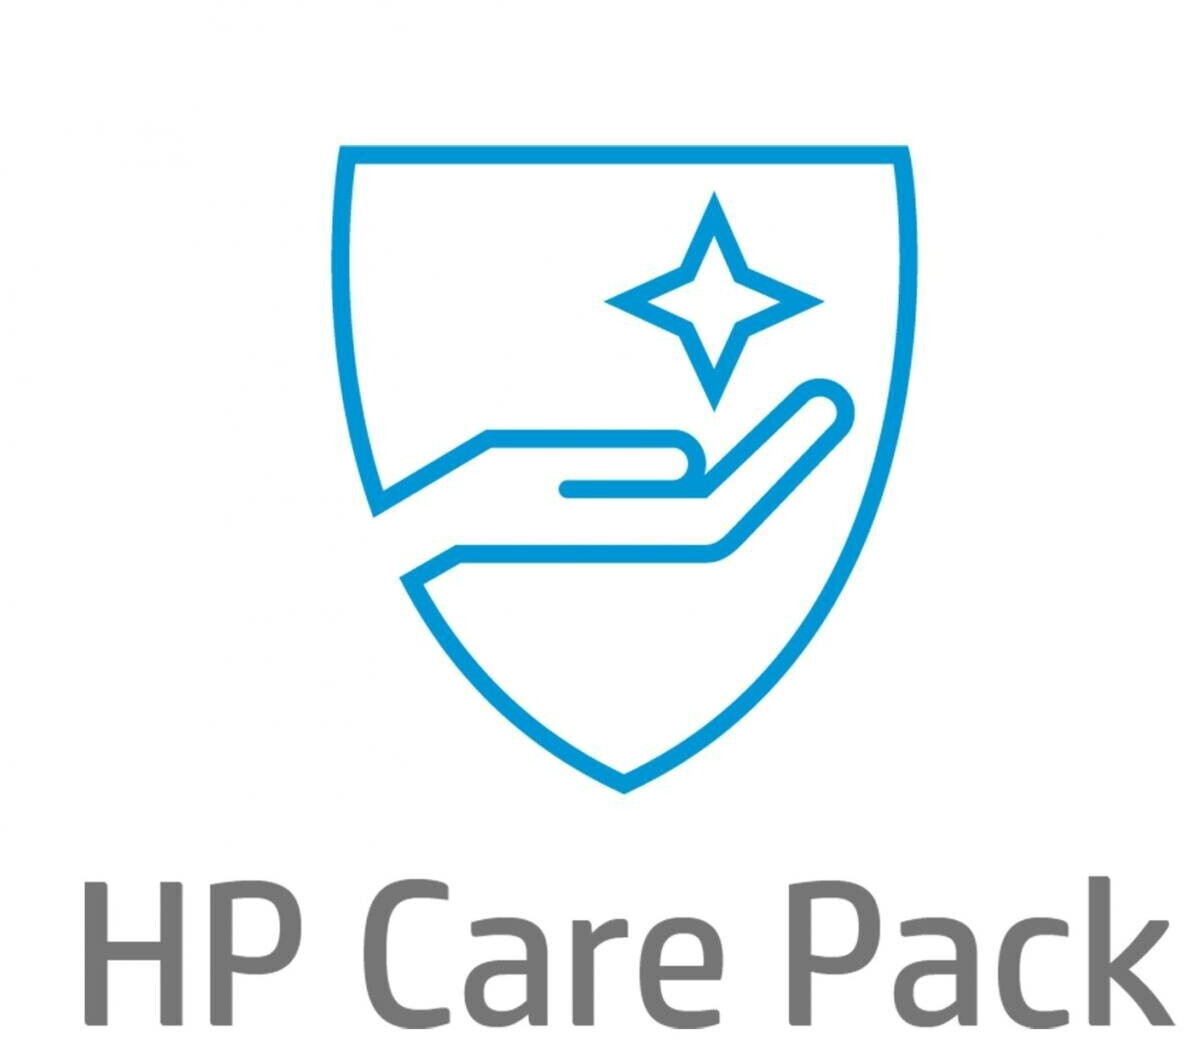 HP 3 year Care Pack w/Next Day Exchange for Officejet Printers (UG072A/E)